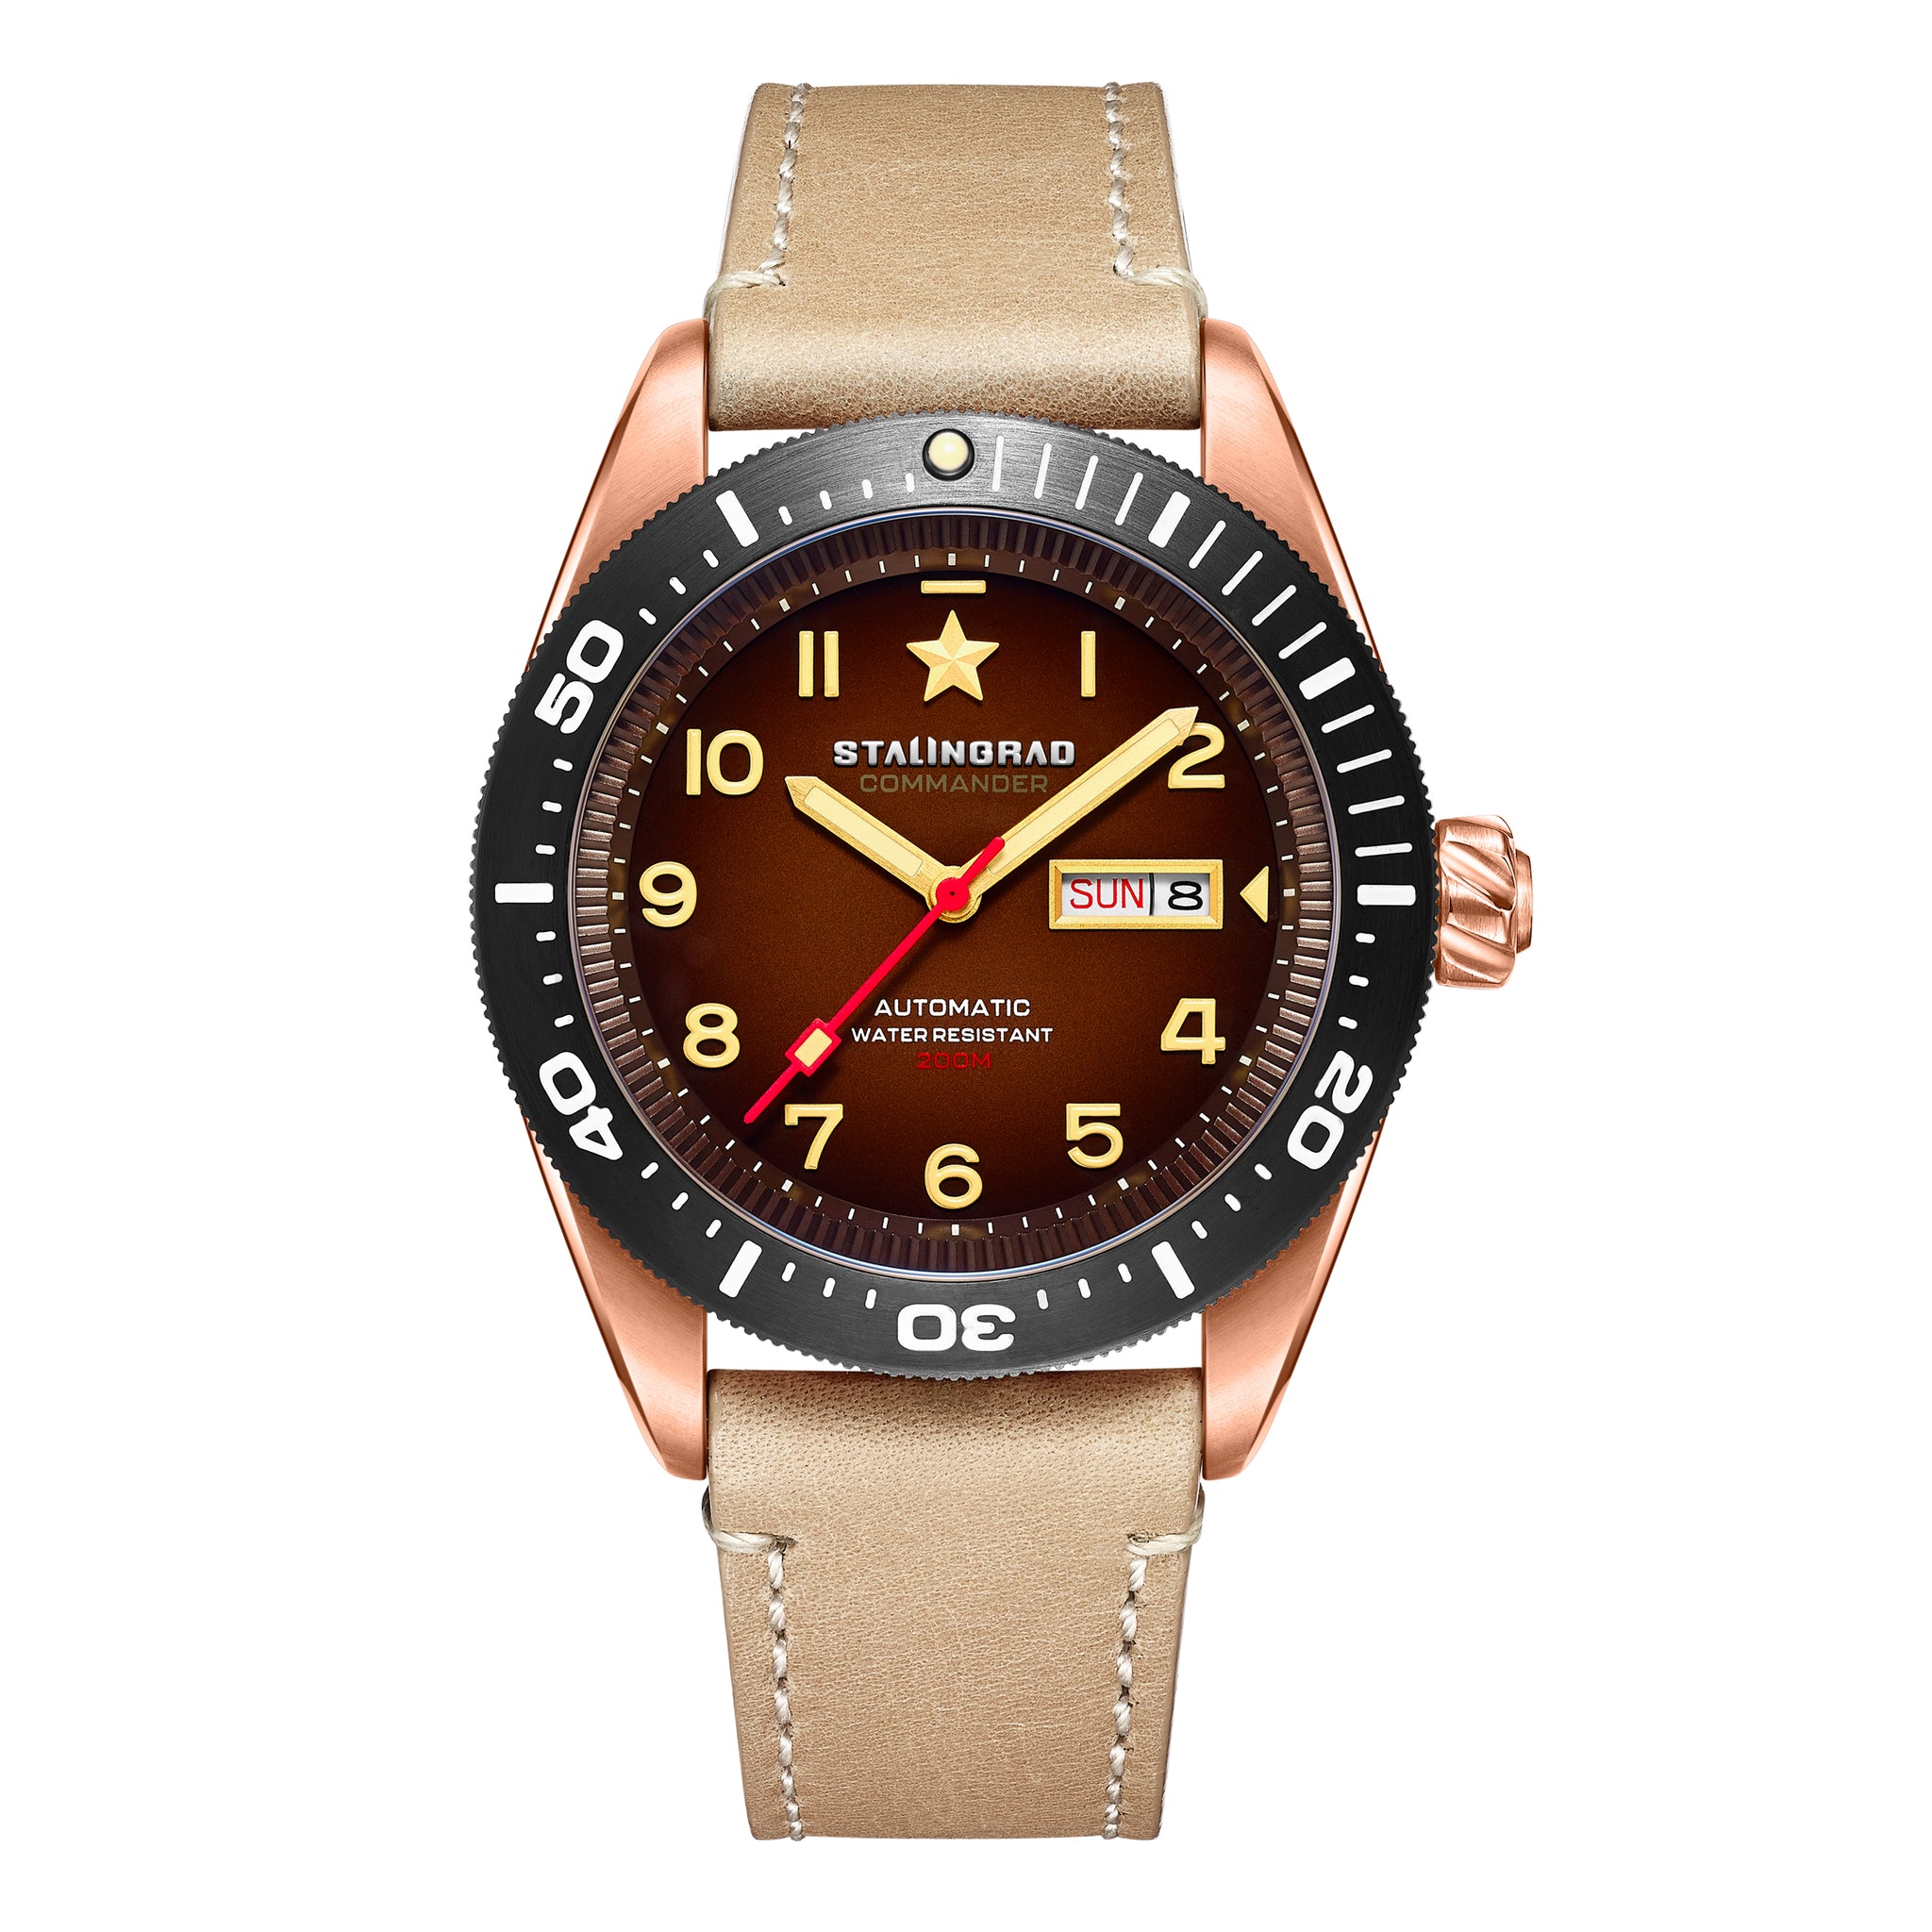 Stalingrad commander watch brown dial and brown leather strap on a white background